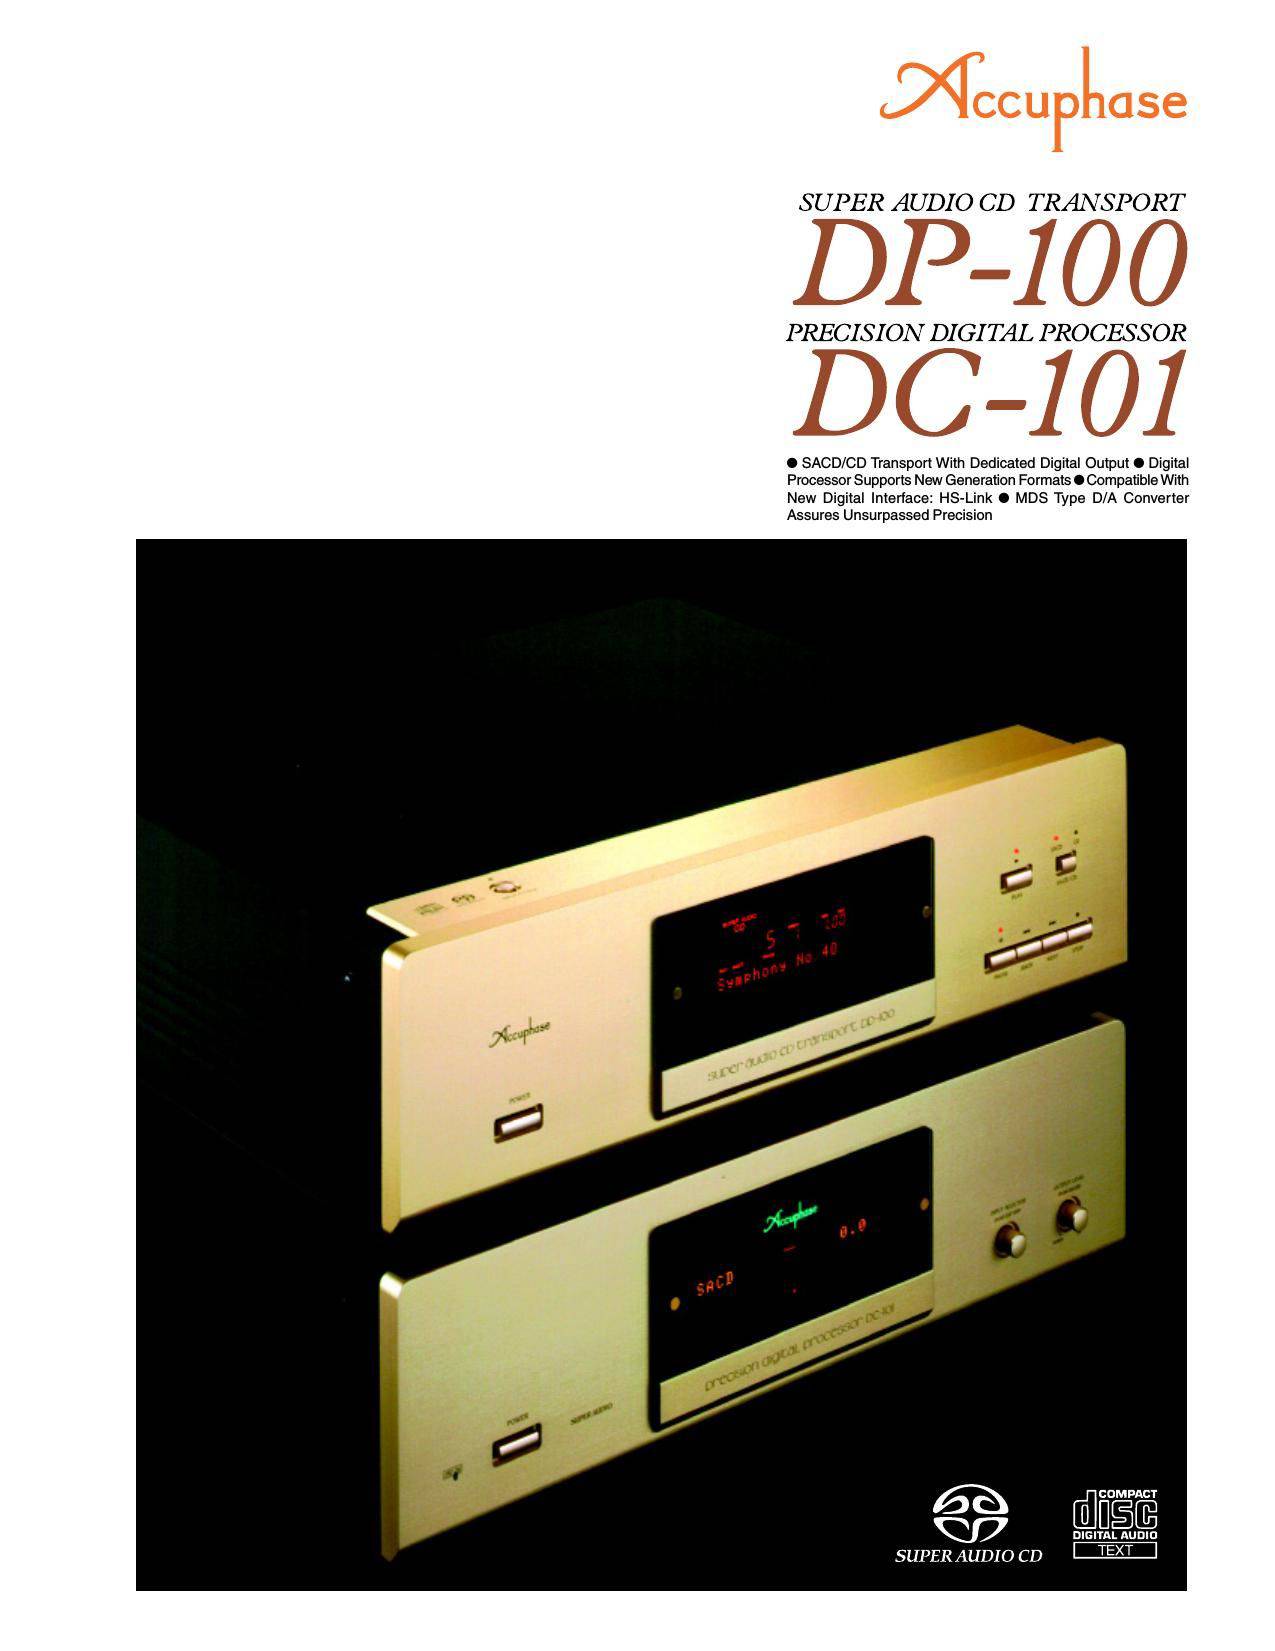 Accuphase DC-101